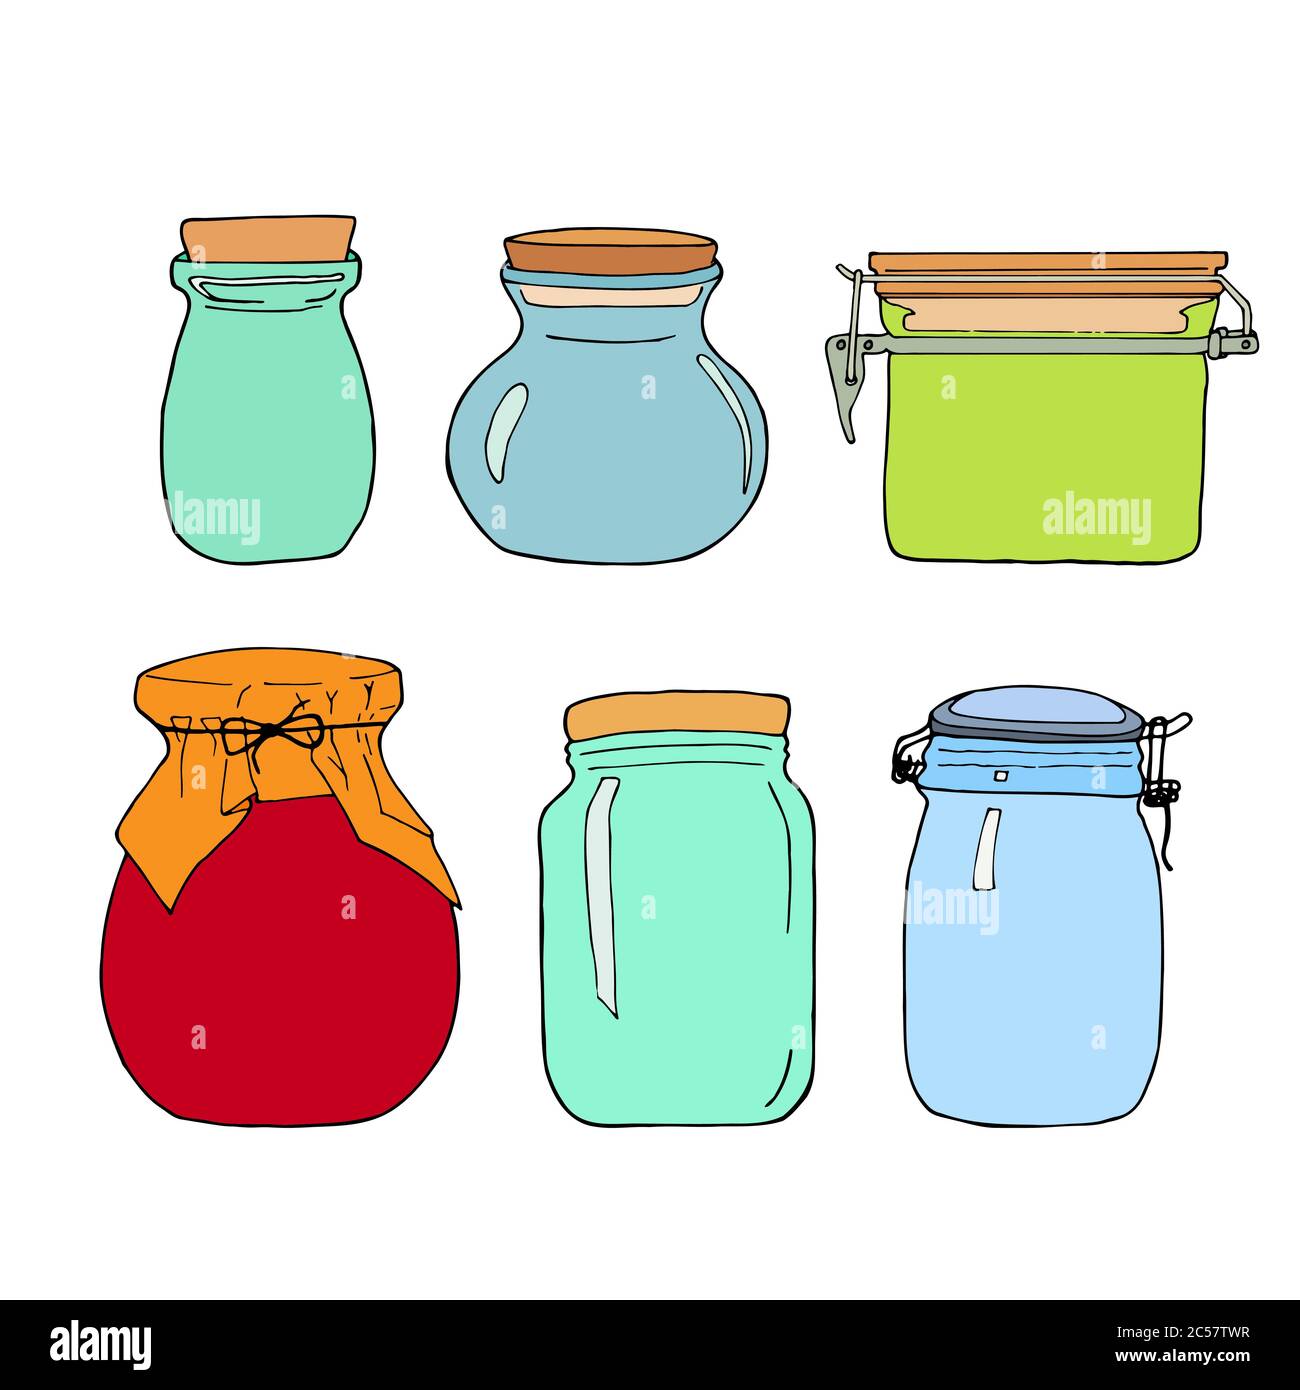 Colorful hand drawn jar set. Contour sketch. Cartoon kitchen objects doodle style. Vector illustration isolated on white background. Stock Vector